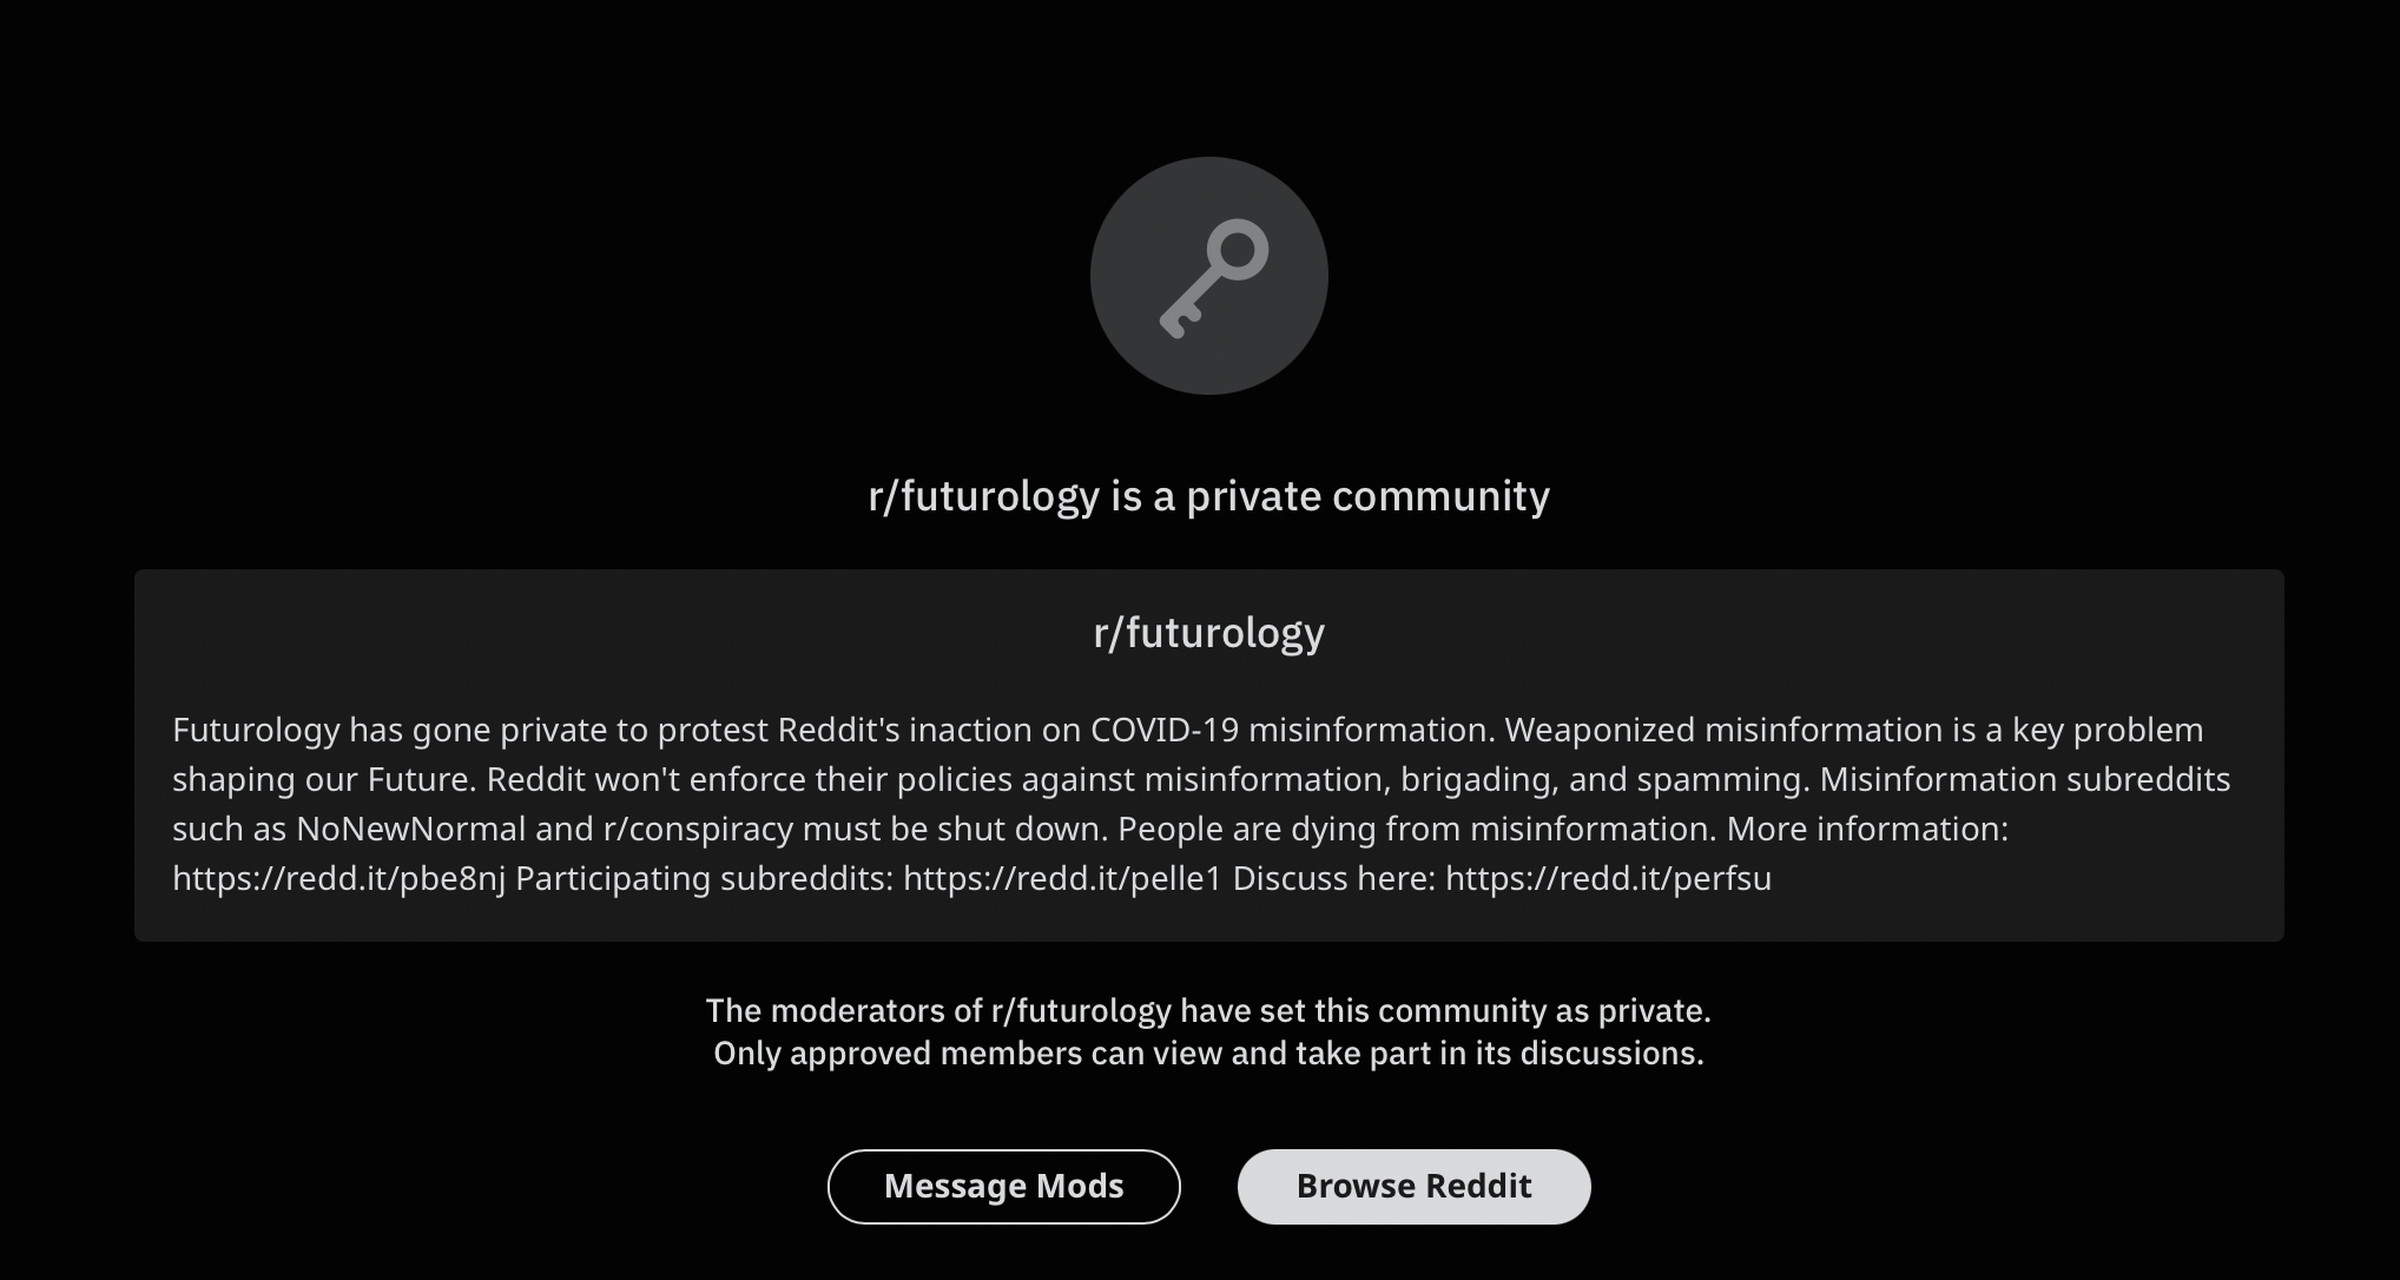 Text that reads: Futurology has gone private to protest Reddit’s inaction on COVID-19 misinformation. Weaponized misinformation is a key problem shaping our Future. Reddit won’t enforce their policies against misinformation, brigading, and spamming. Misinformation subreddits such as NoNewNormal and r/conspiracy must be shut down. People are dying from misinformation.